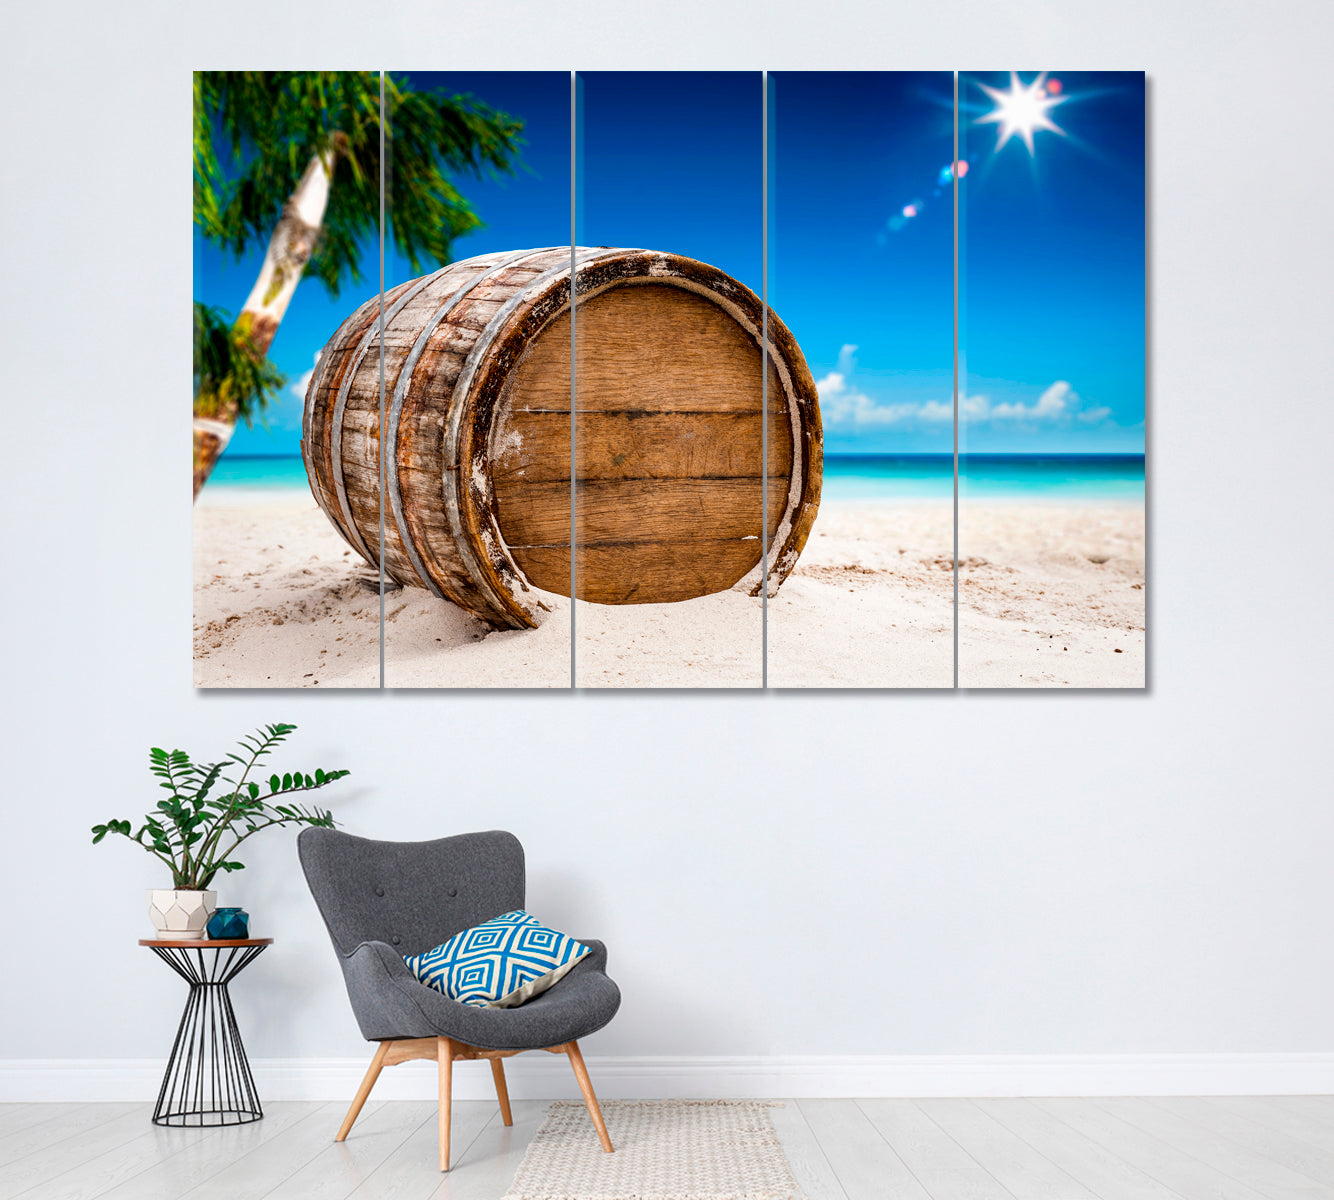 Old Barrel on Beach Canvas Print ArtLexy 5 Panels 36"x24" inches 